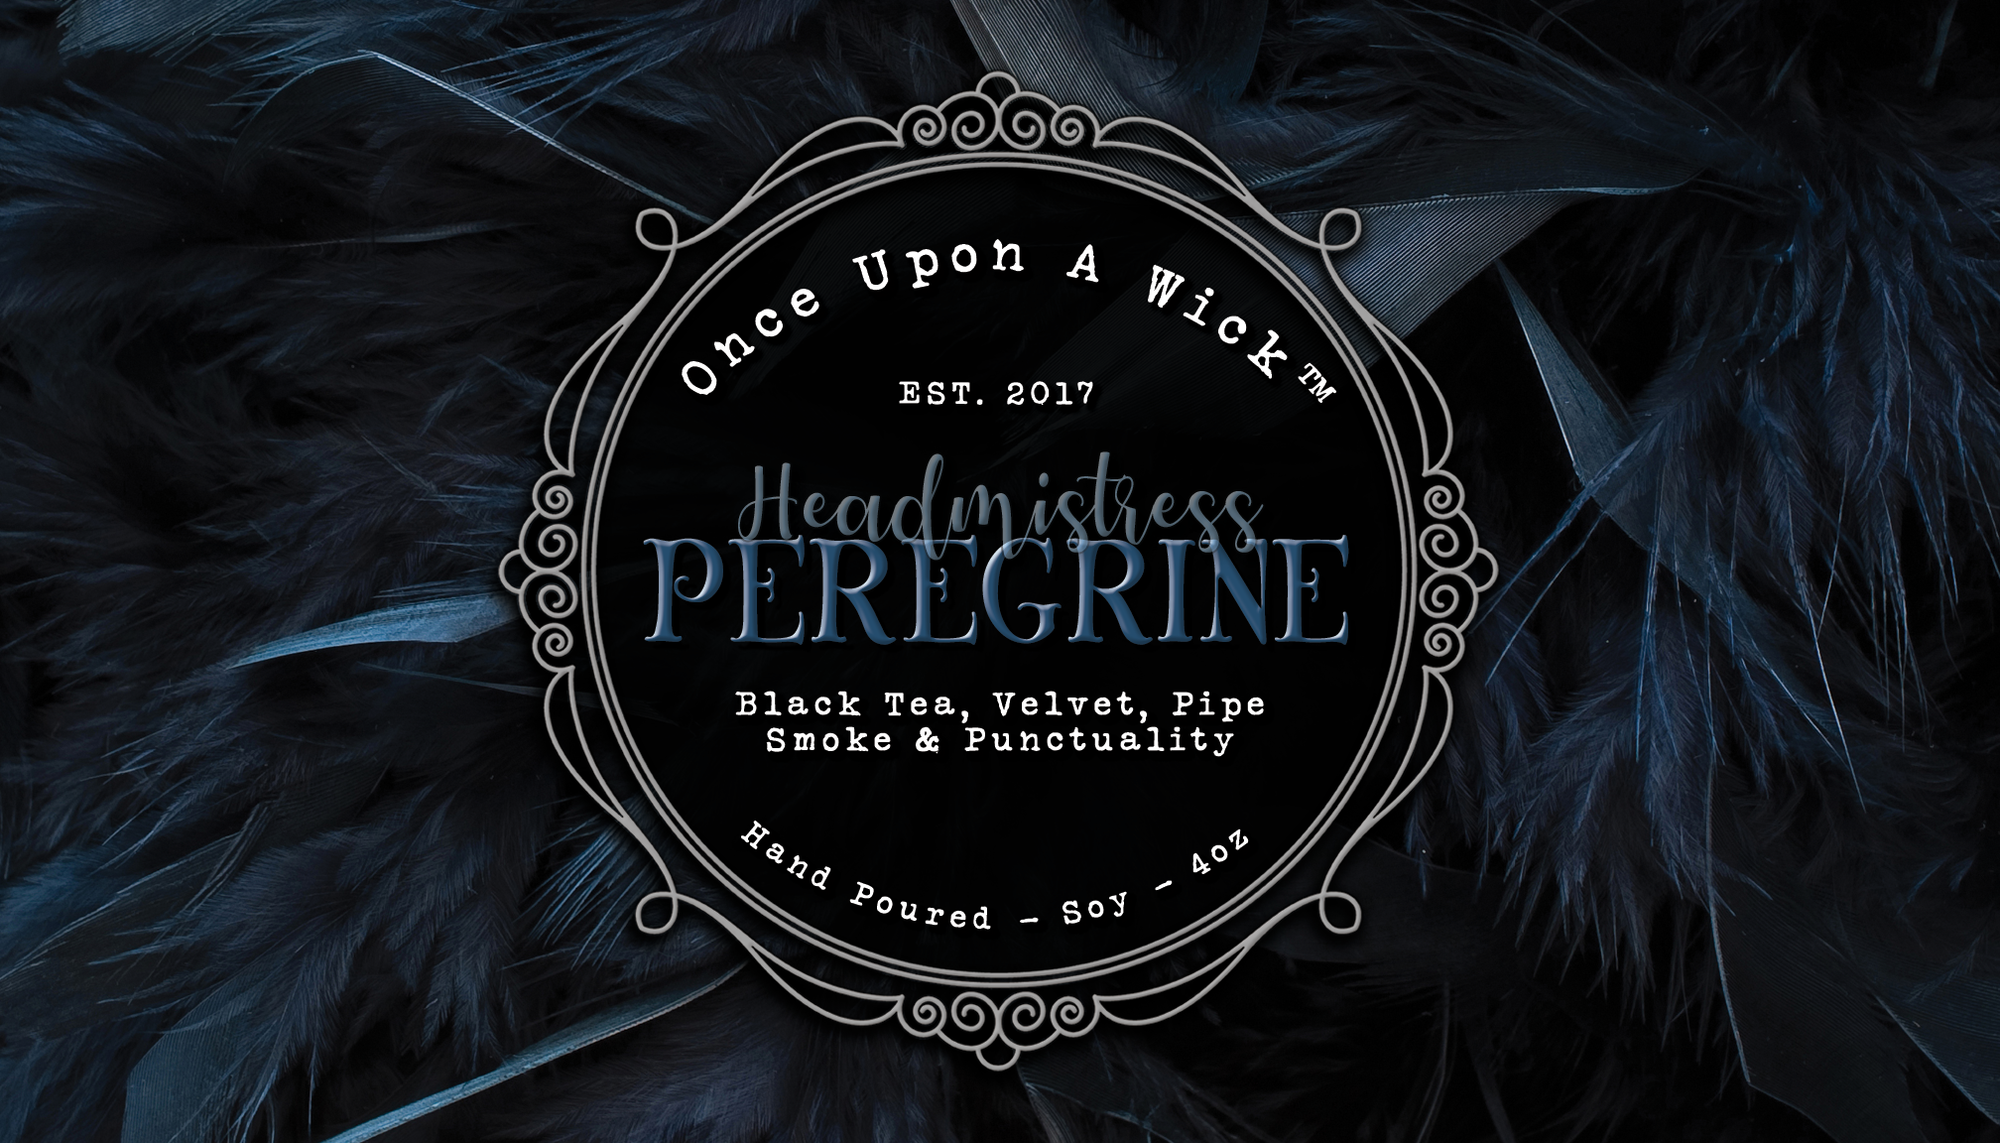 Headmistress Peregrine | Miss Peregrine's Home for Peculiar Children Inspired